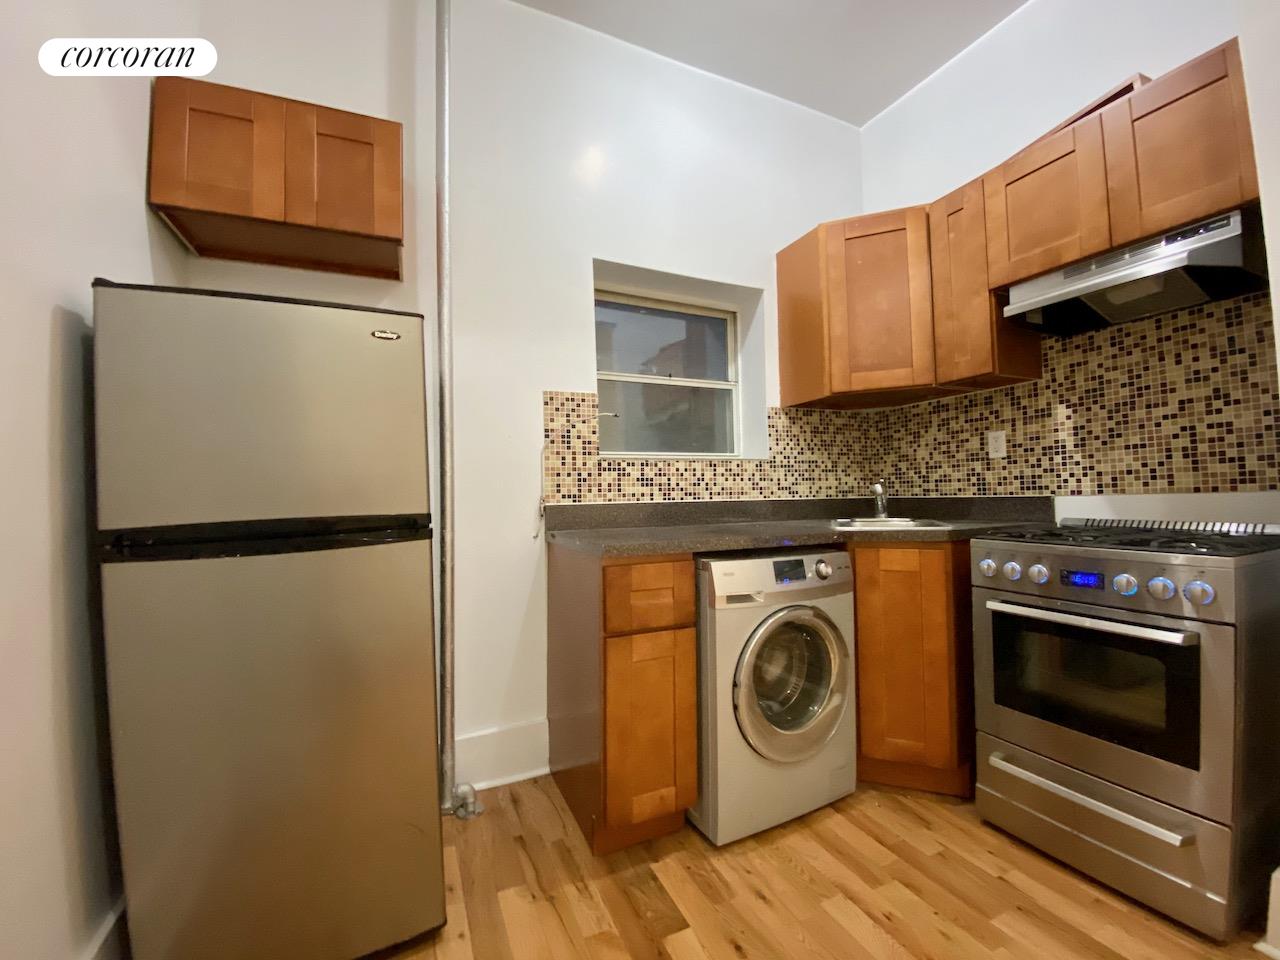 a kitchen with a refrigerator and a washer dryer